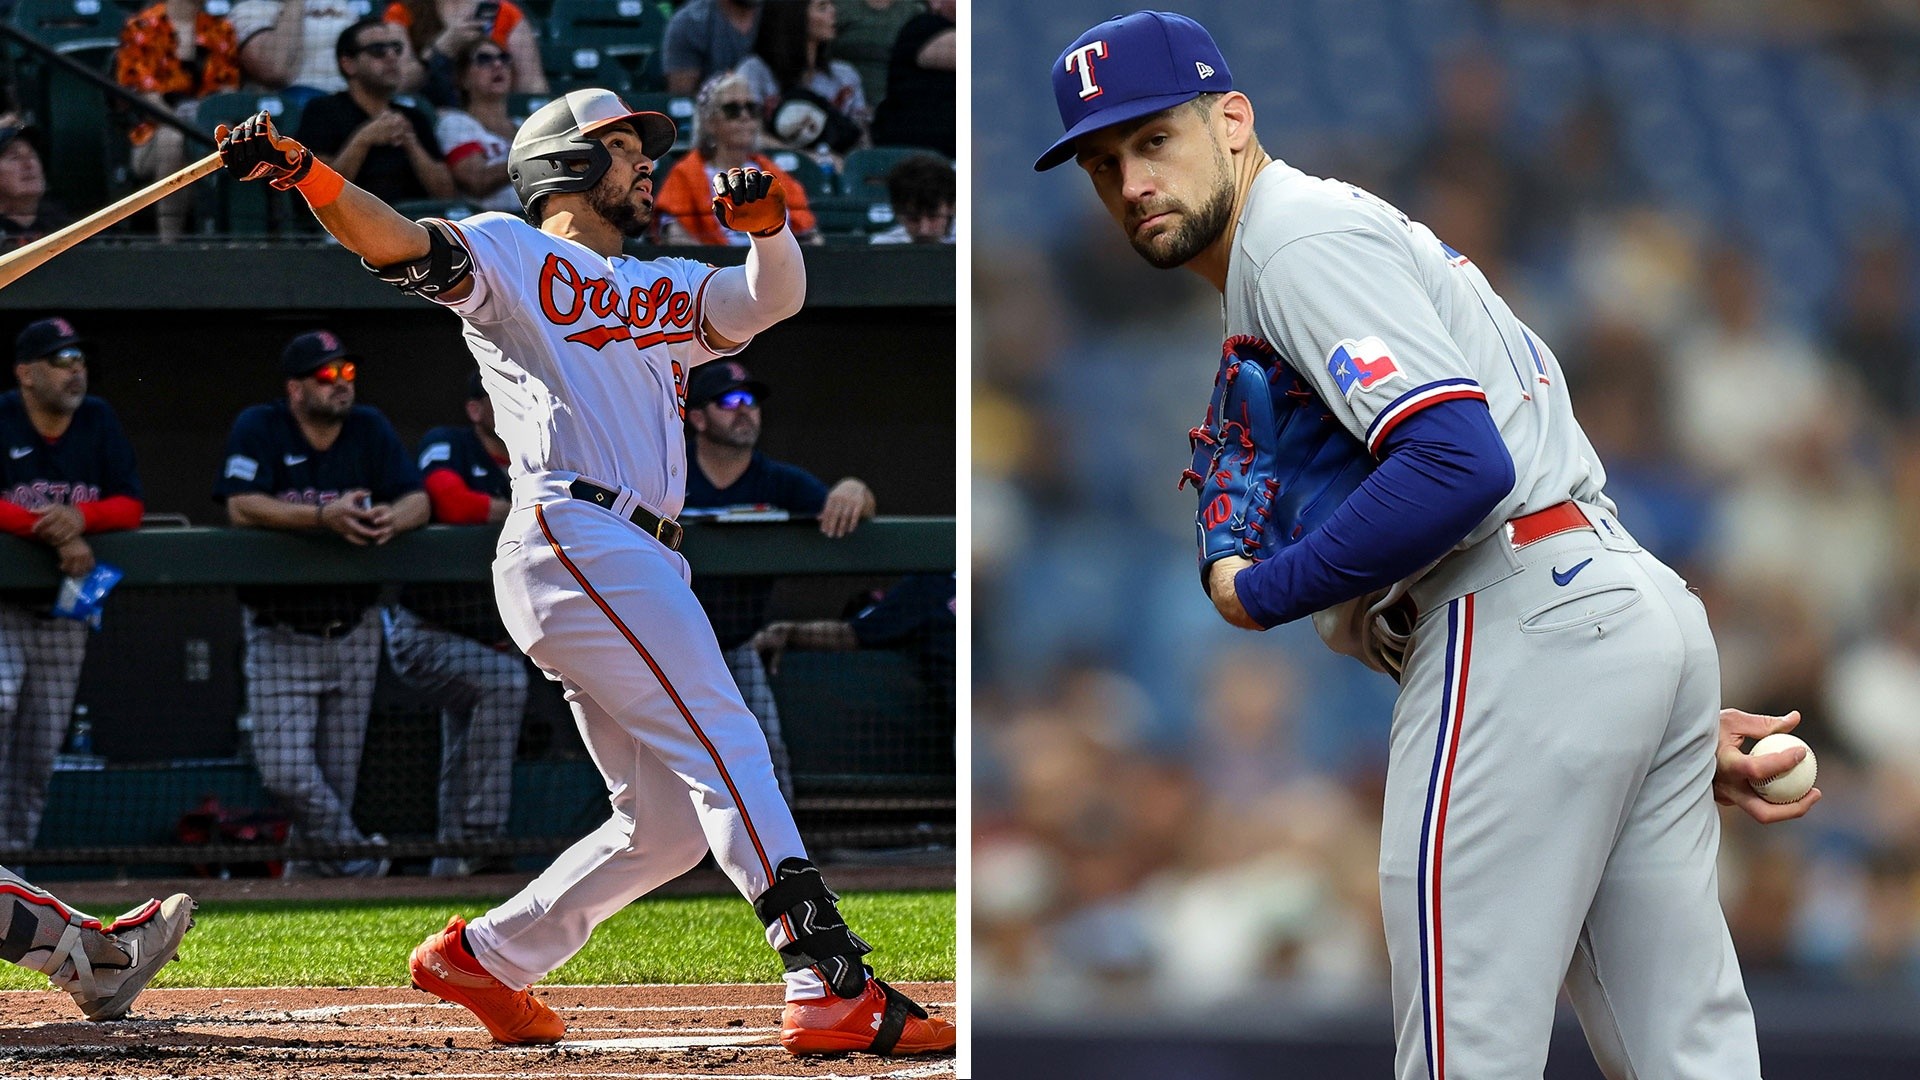 Rangers piece it together, keep Orioles bats quiet to take early